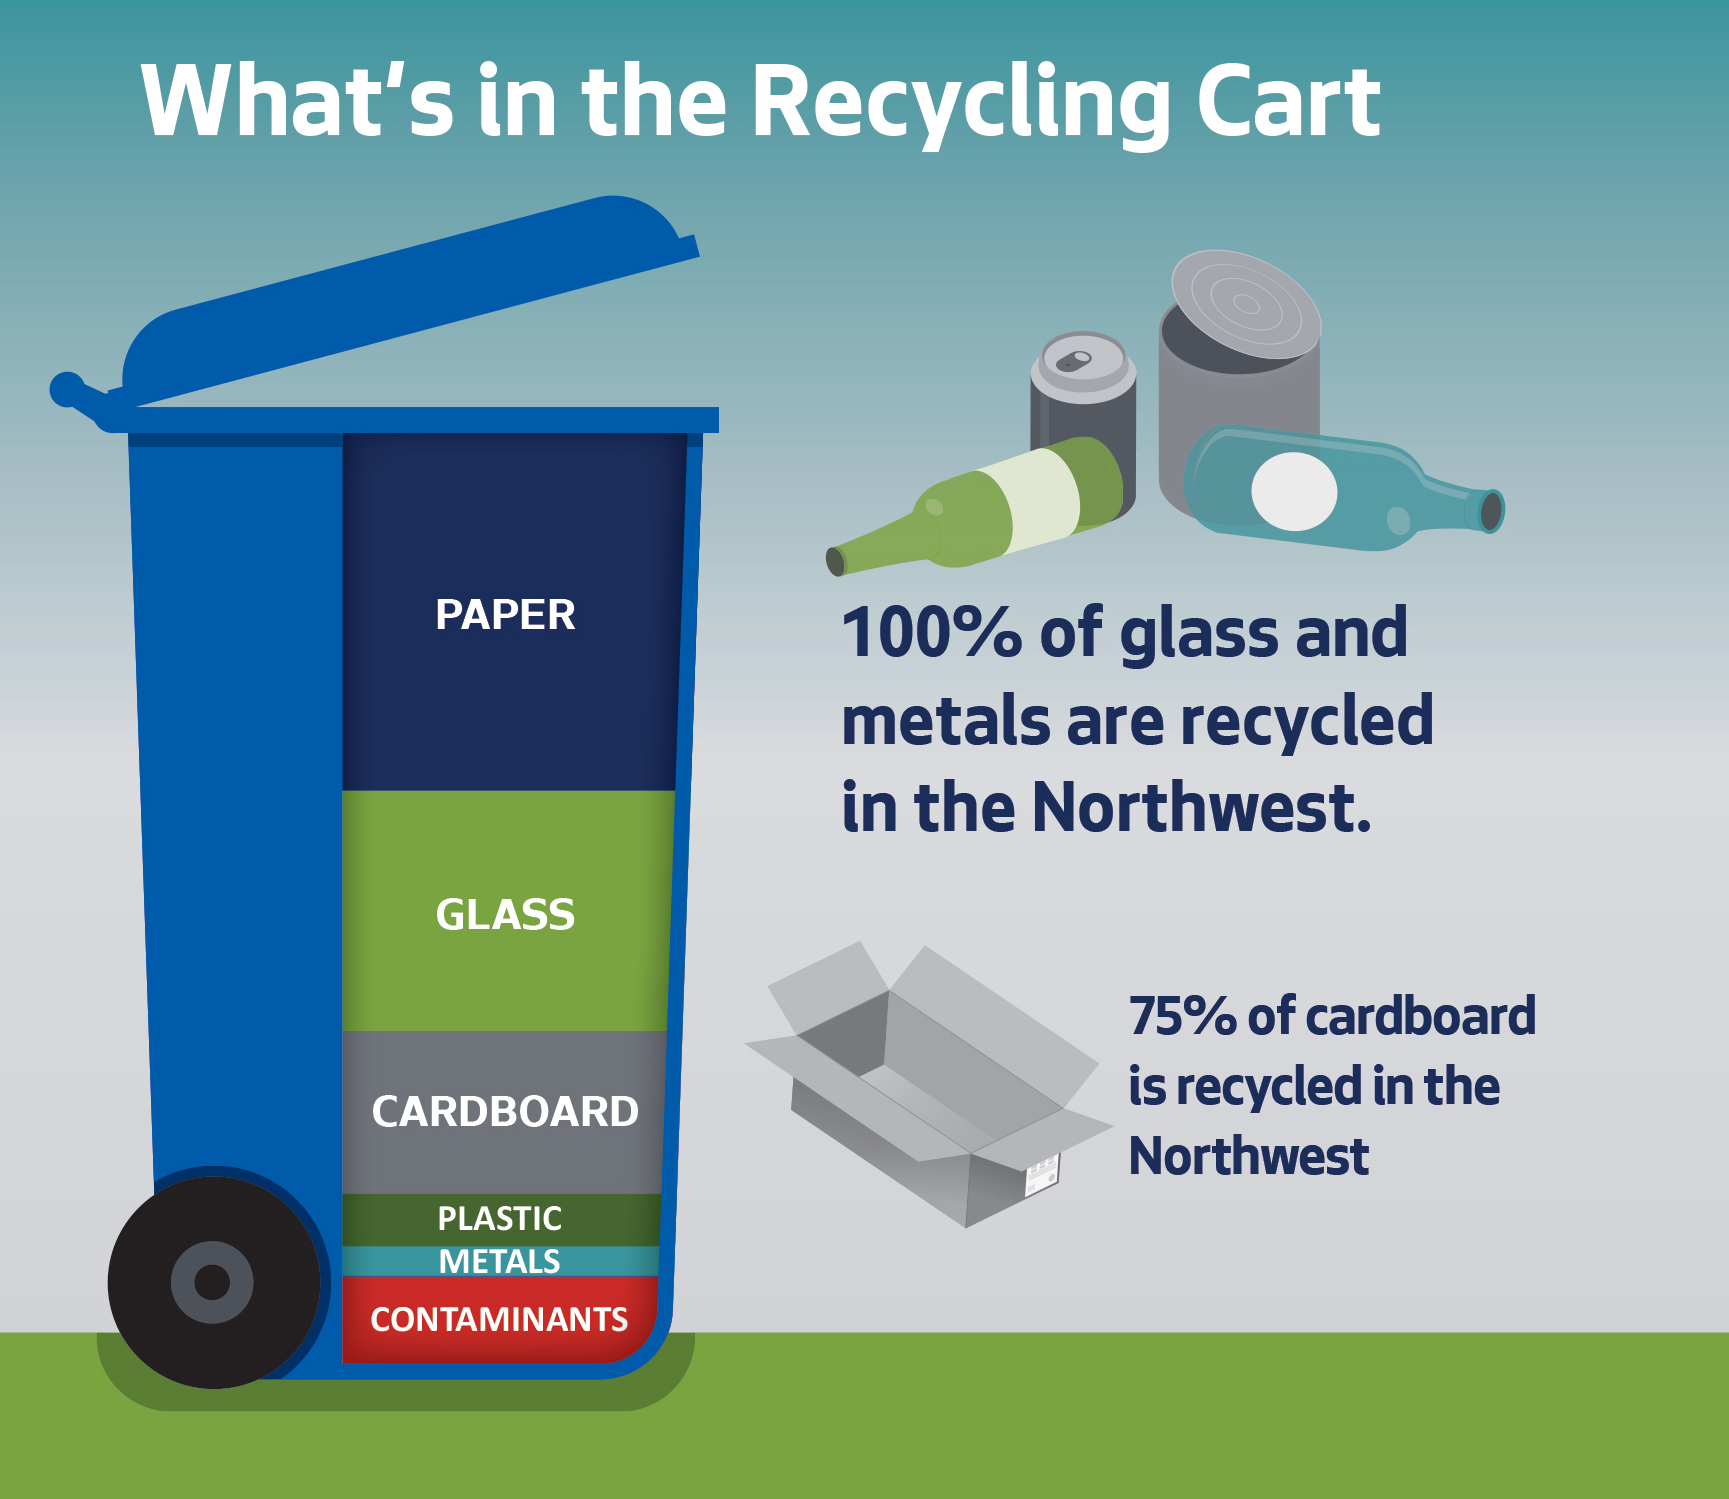 https://www.seattle.gov/images/Departments/SPU/Services/Recycling/Recycling_Whats_In_Cart.jpg